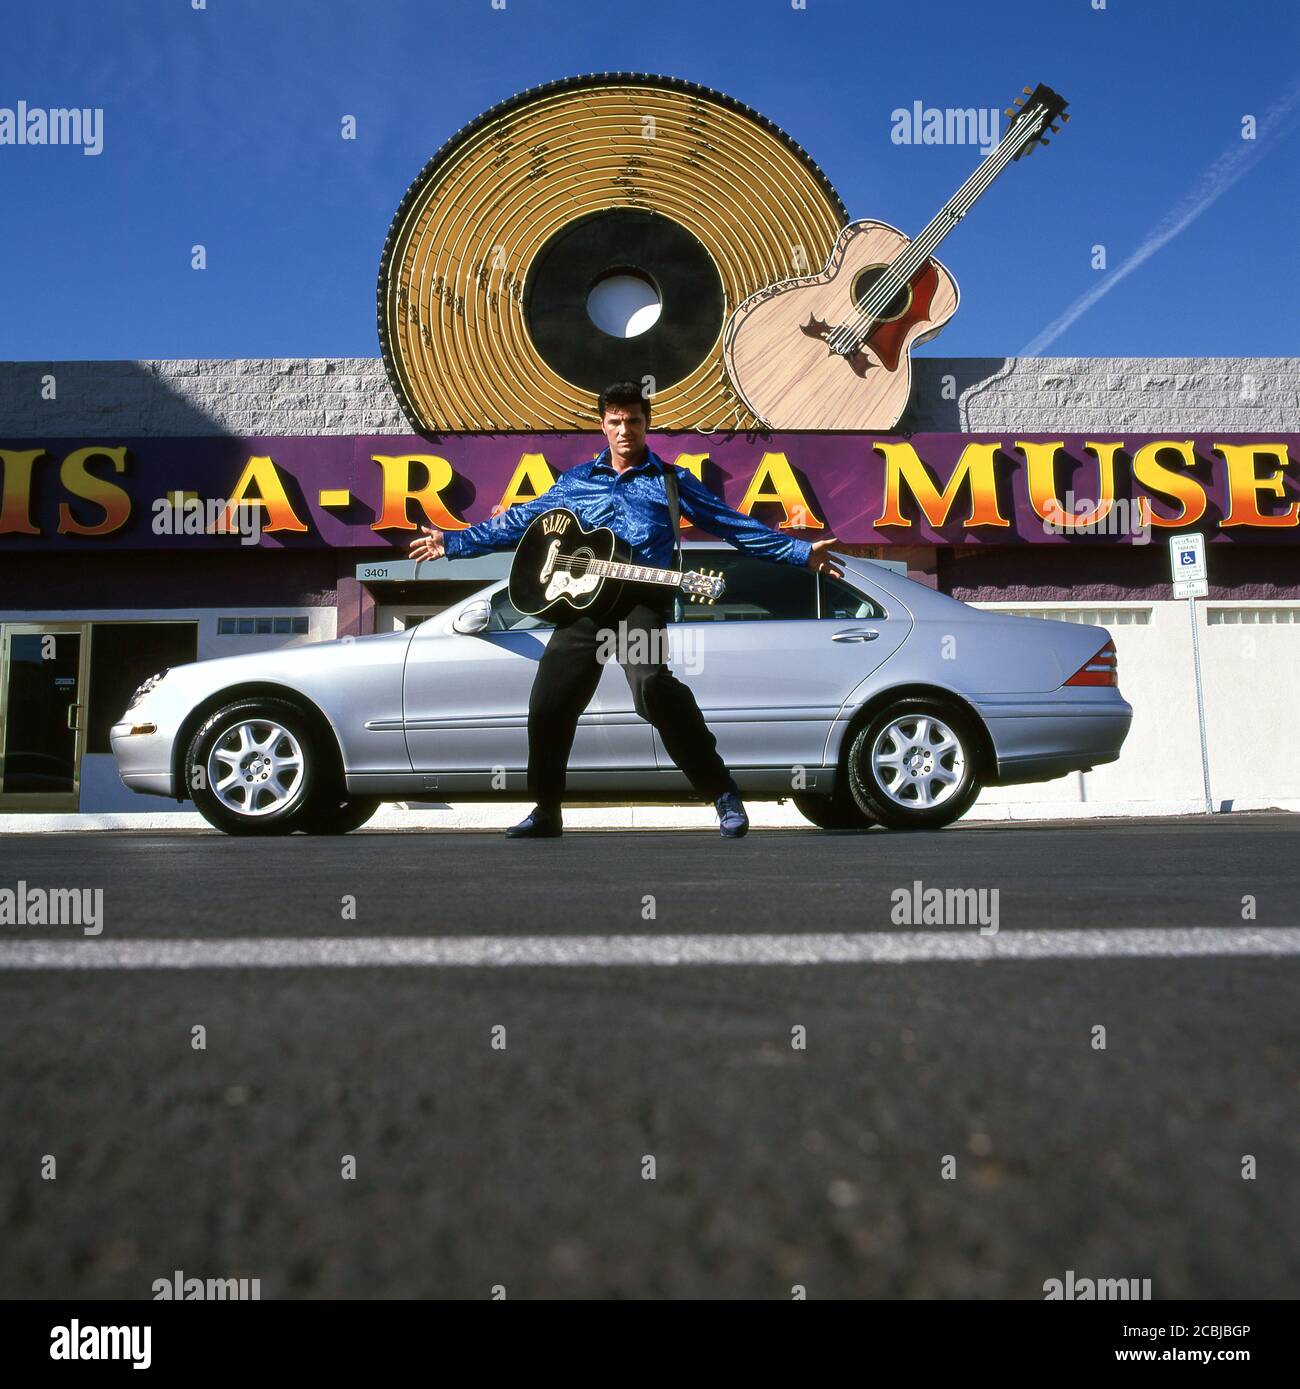 Elvis inpersonator at the Elvis-A-Rama Museum in Las Vegas with Mercedes S500 automobile. 1998 Stock Photo